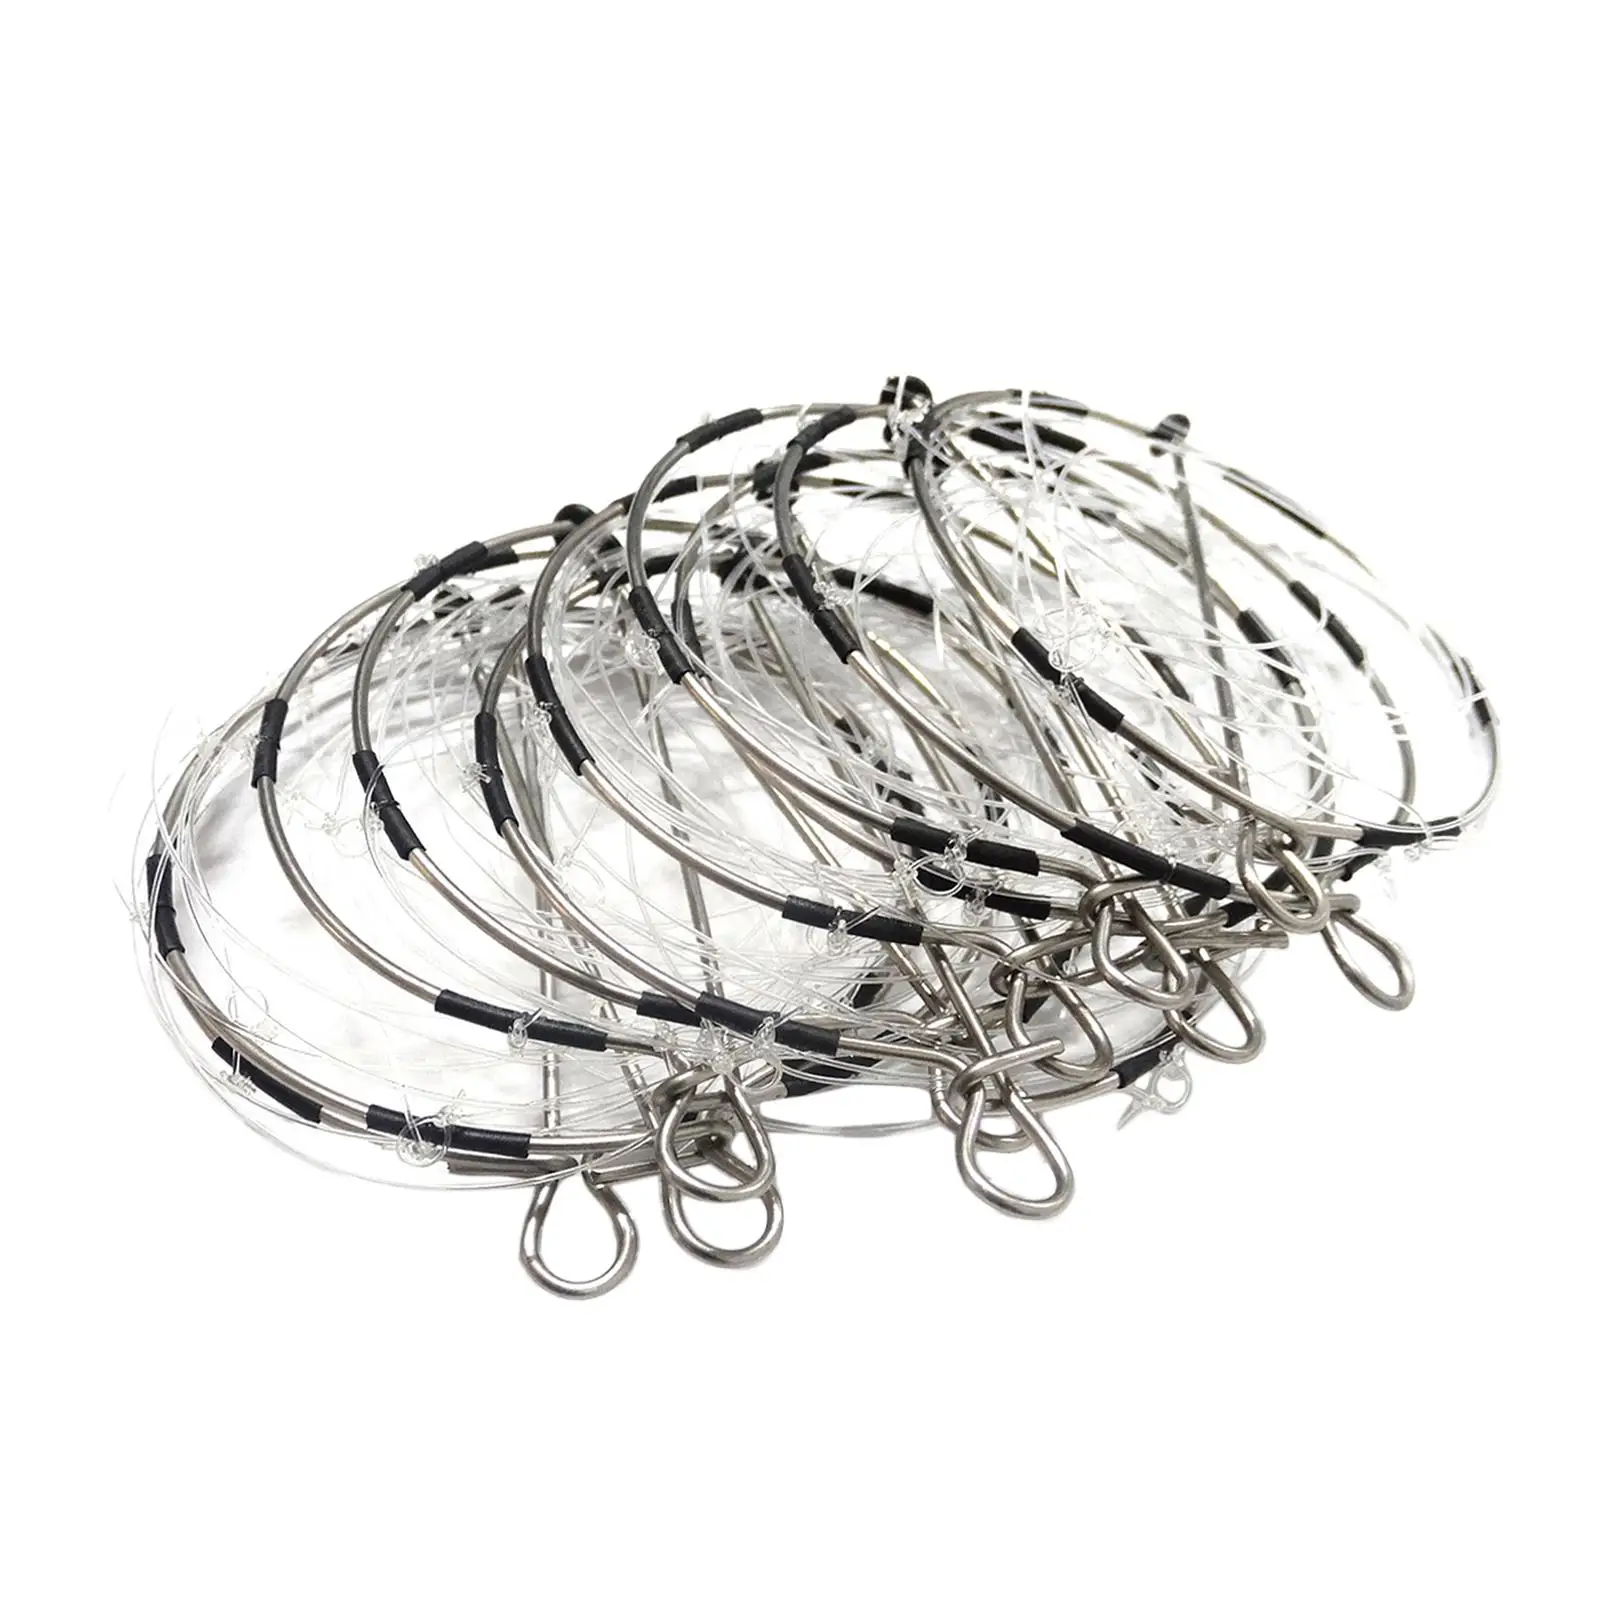 10Pcs Crab Trap Portable Six Movable Buckles Steel Catch Crabs Tool Fishing Bait Trap for Crab Crayfish Prawn shrimp Seaside